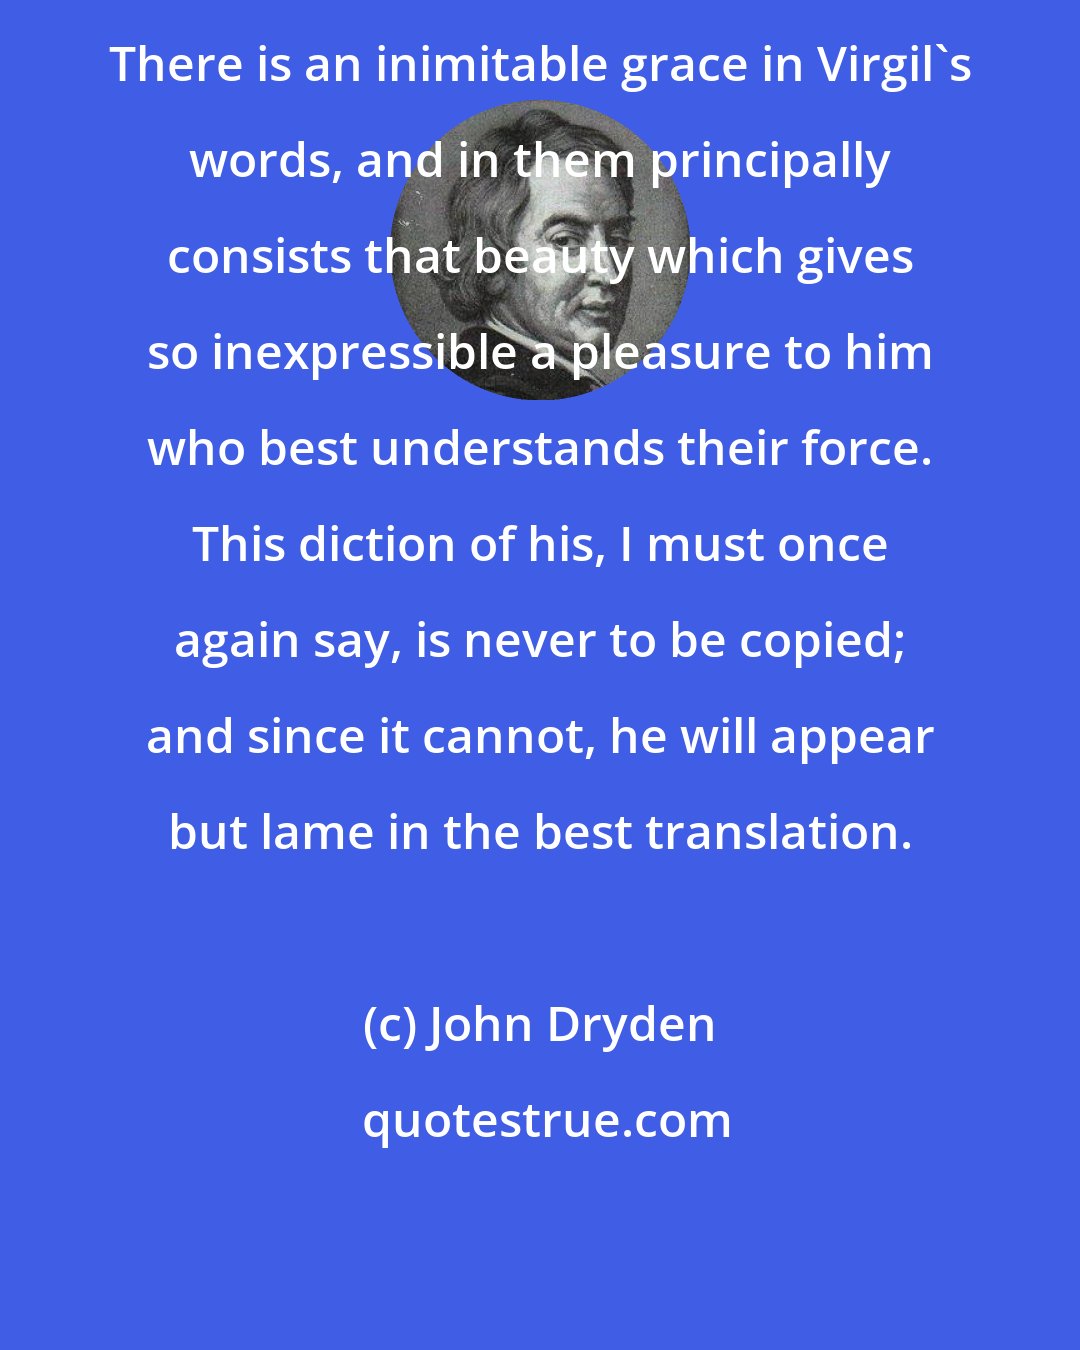 John Dryden: There is an inimitable grace in Virgil's words, and in them principally consists that beauty which gives so inexpressible a pleasure to him who best understands their force. This diction of his, I must once again say, is never to be copied; and since it cannot, he will appear but lame in the best translation.